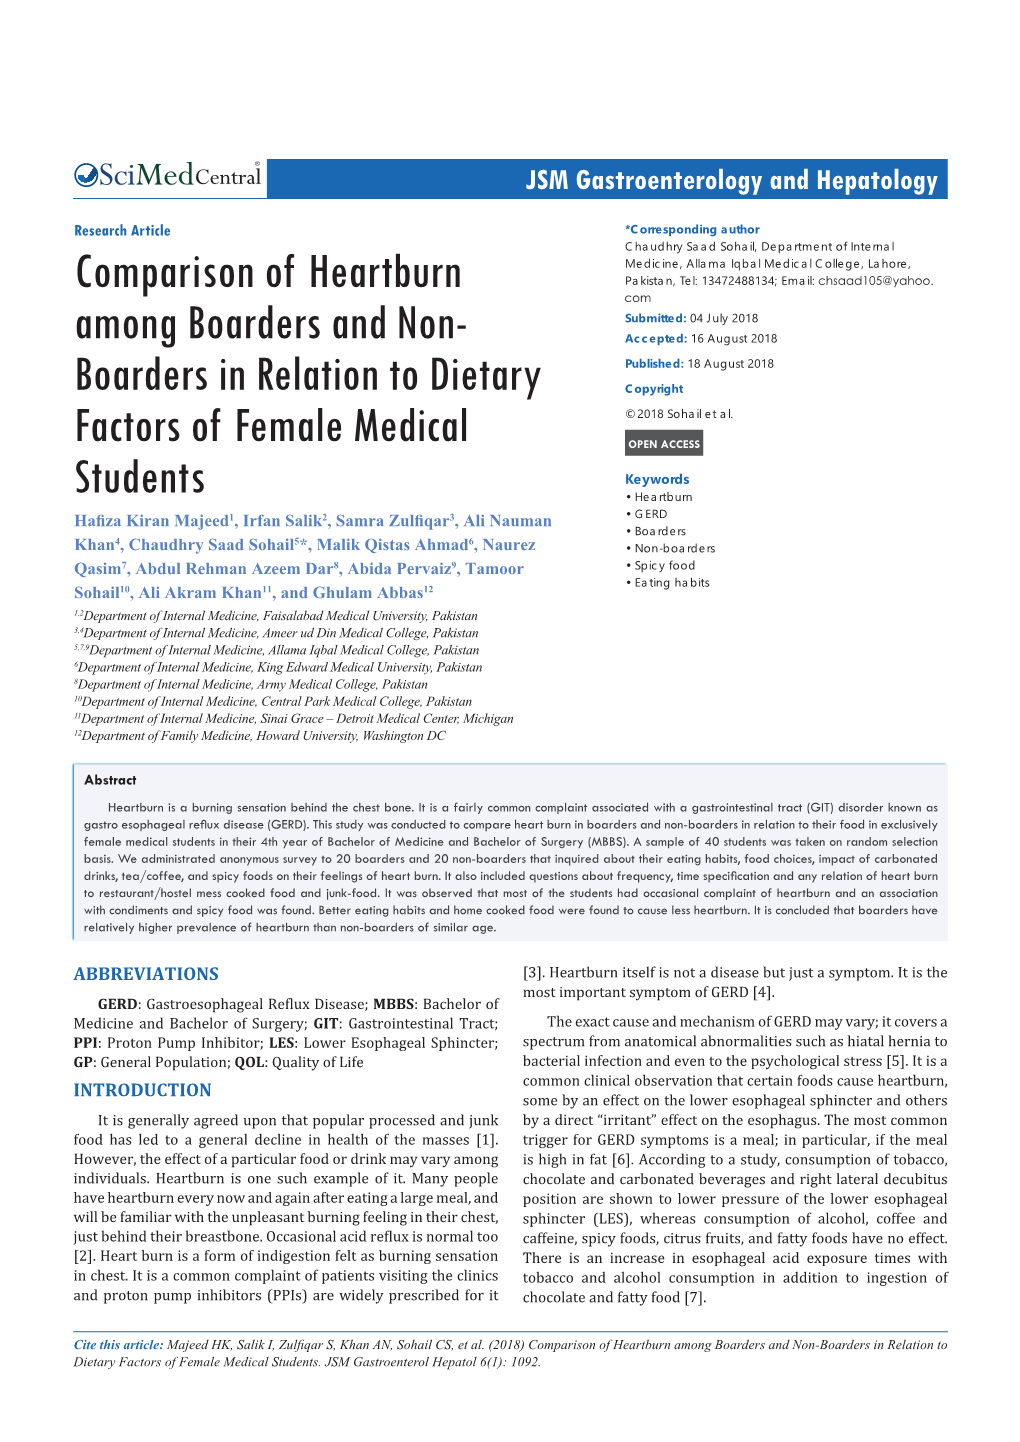 Comparison of Heartburn Among Boarders and Non-Boarders in Relation to Dietary Factors of Female Medical Students